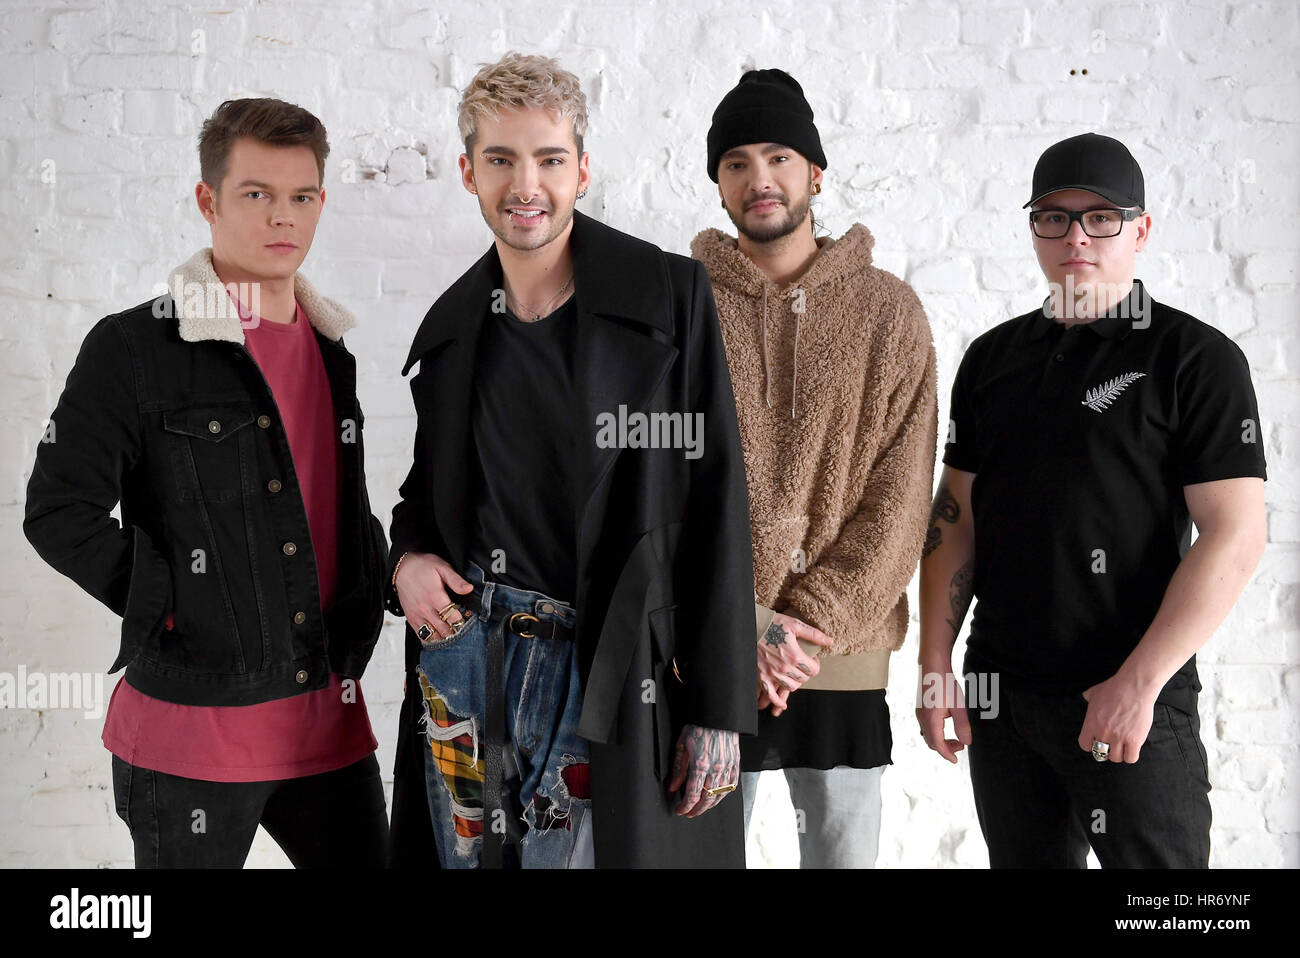 Berlin, Germany. 21st Feb, 2017. Musicians from the band Tokio Hotel: Georg Moritz, Hagen Listing (l-r), Bill Kaulitz, Tom Kaulitz and Gustav Klaus Wolfgang Schaefer, standing together in Berlin, Germany, 21 February 2017. On 03 March 2017 they are releasing a new album 'Dream Machine' Photo: Britta Pedersen/dpa-Zentralbild/ZB/dpa/Alamy Live News Stock Photo